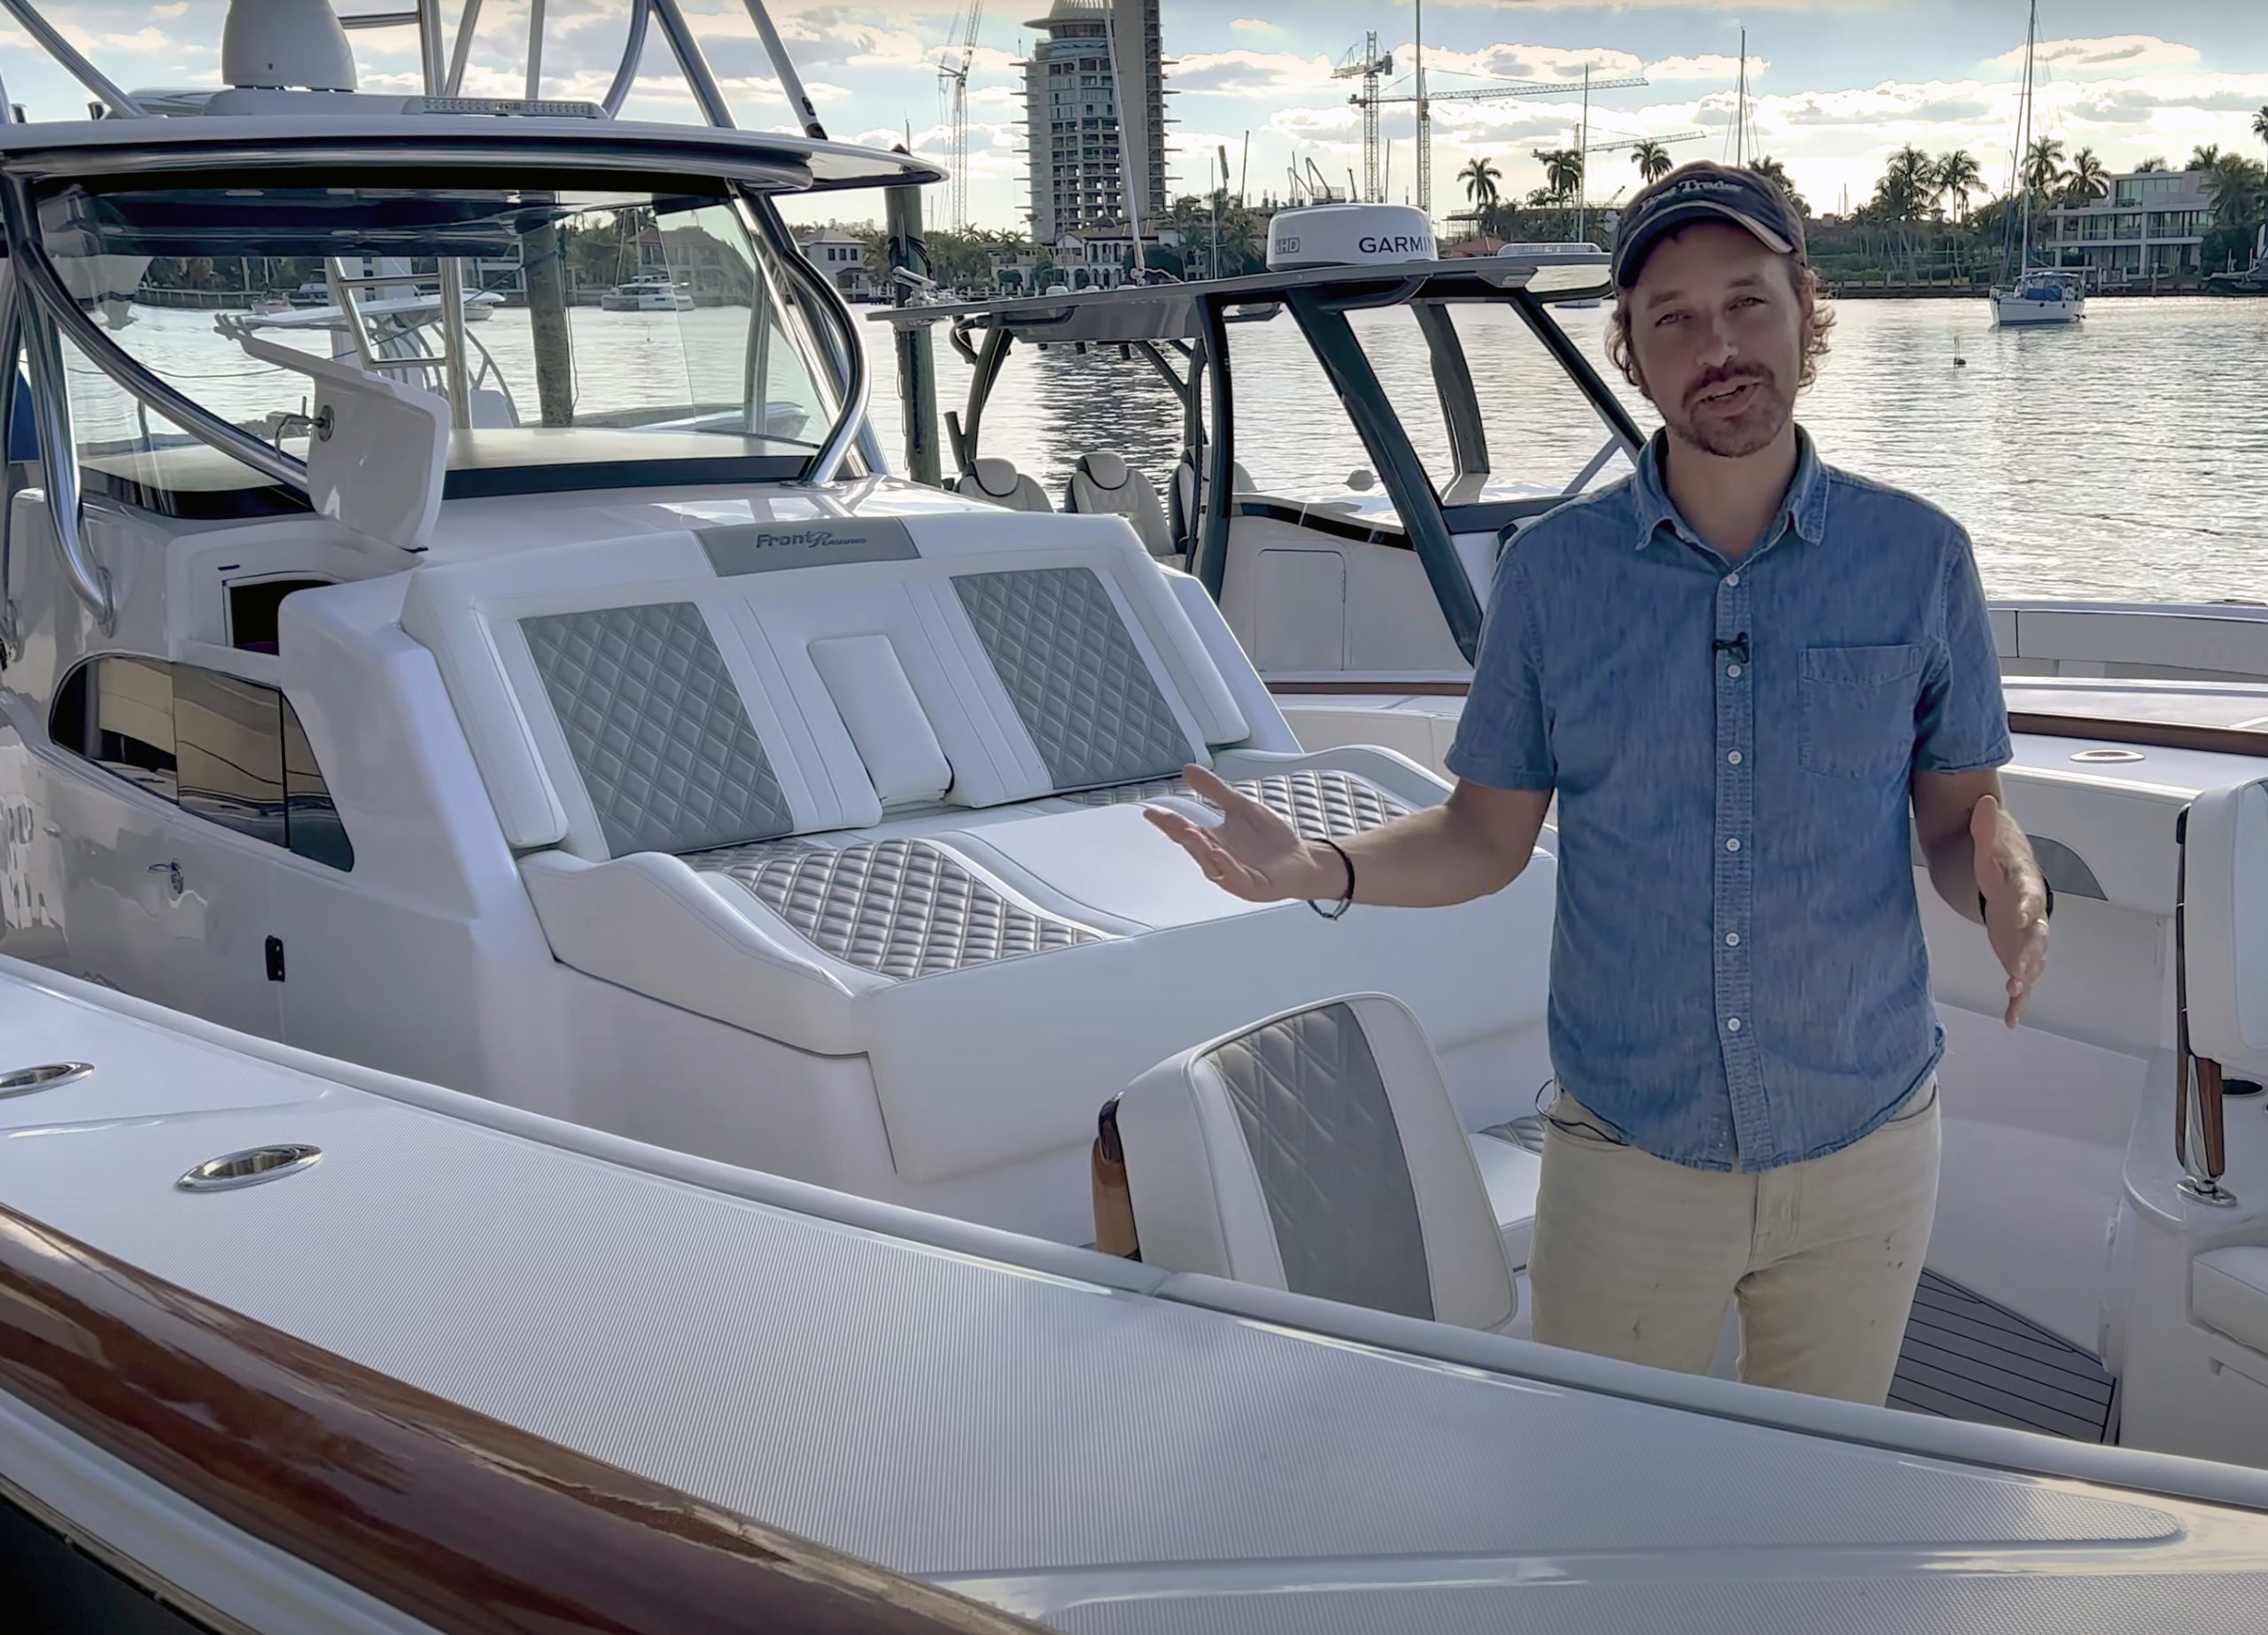 Ryan McVinney with Boat Trader onboard a Front Runner 47 center console boat